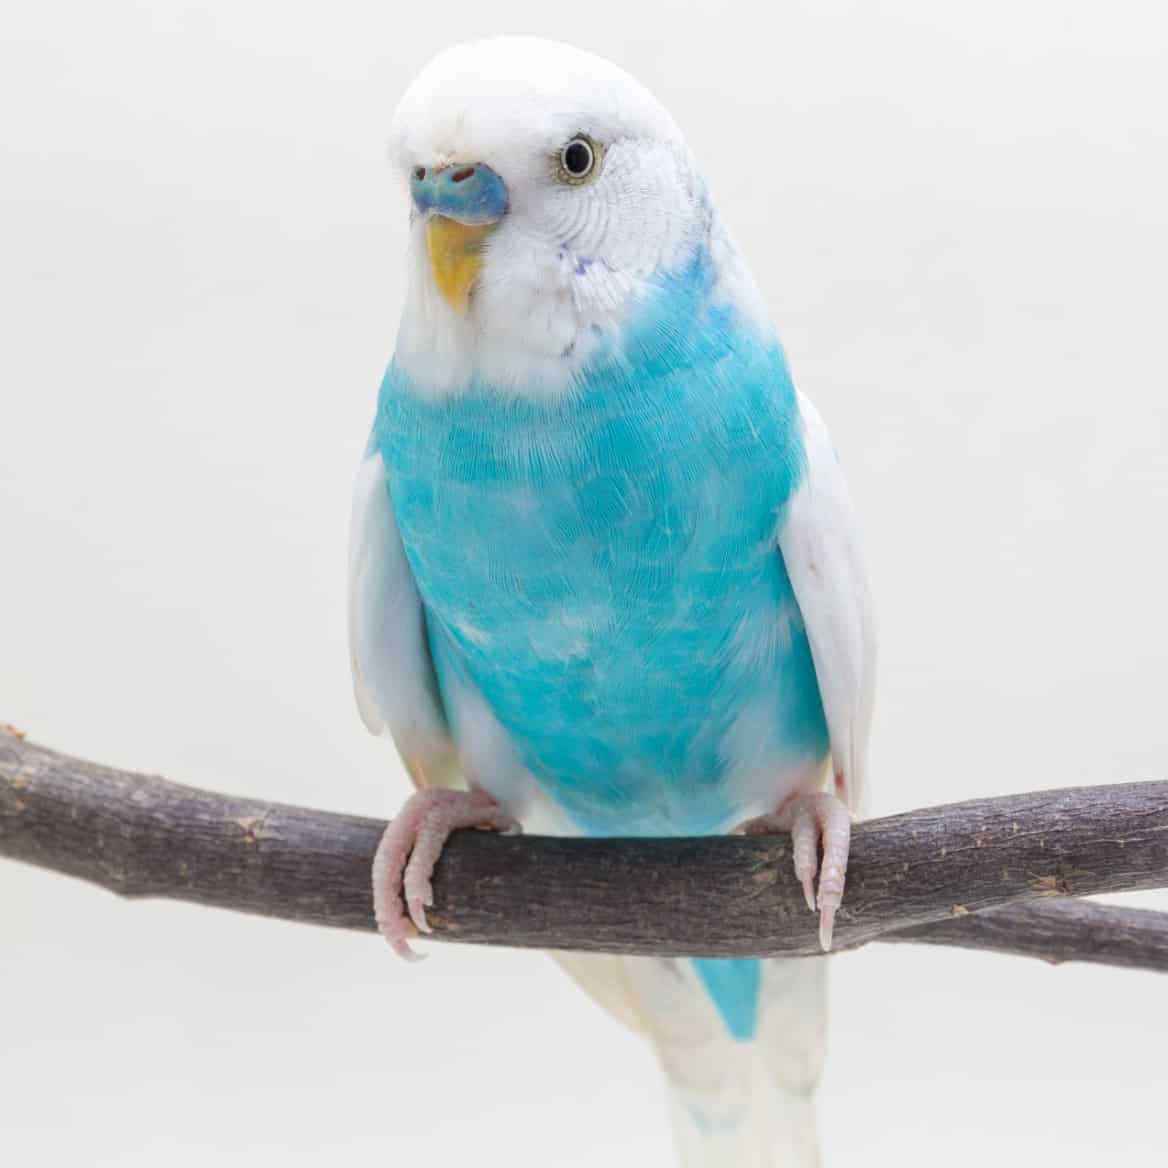 How Do I Handle the Loss of a Budgie From a Bonded Pair?